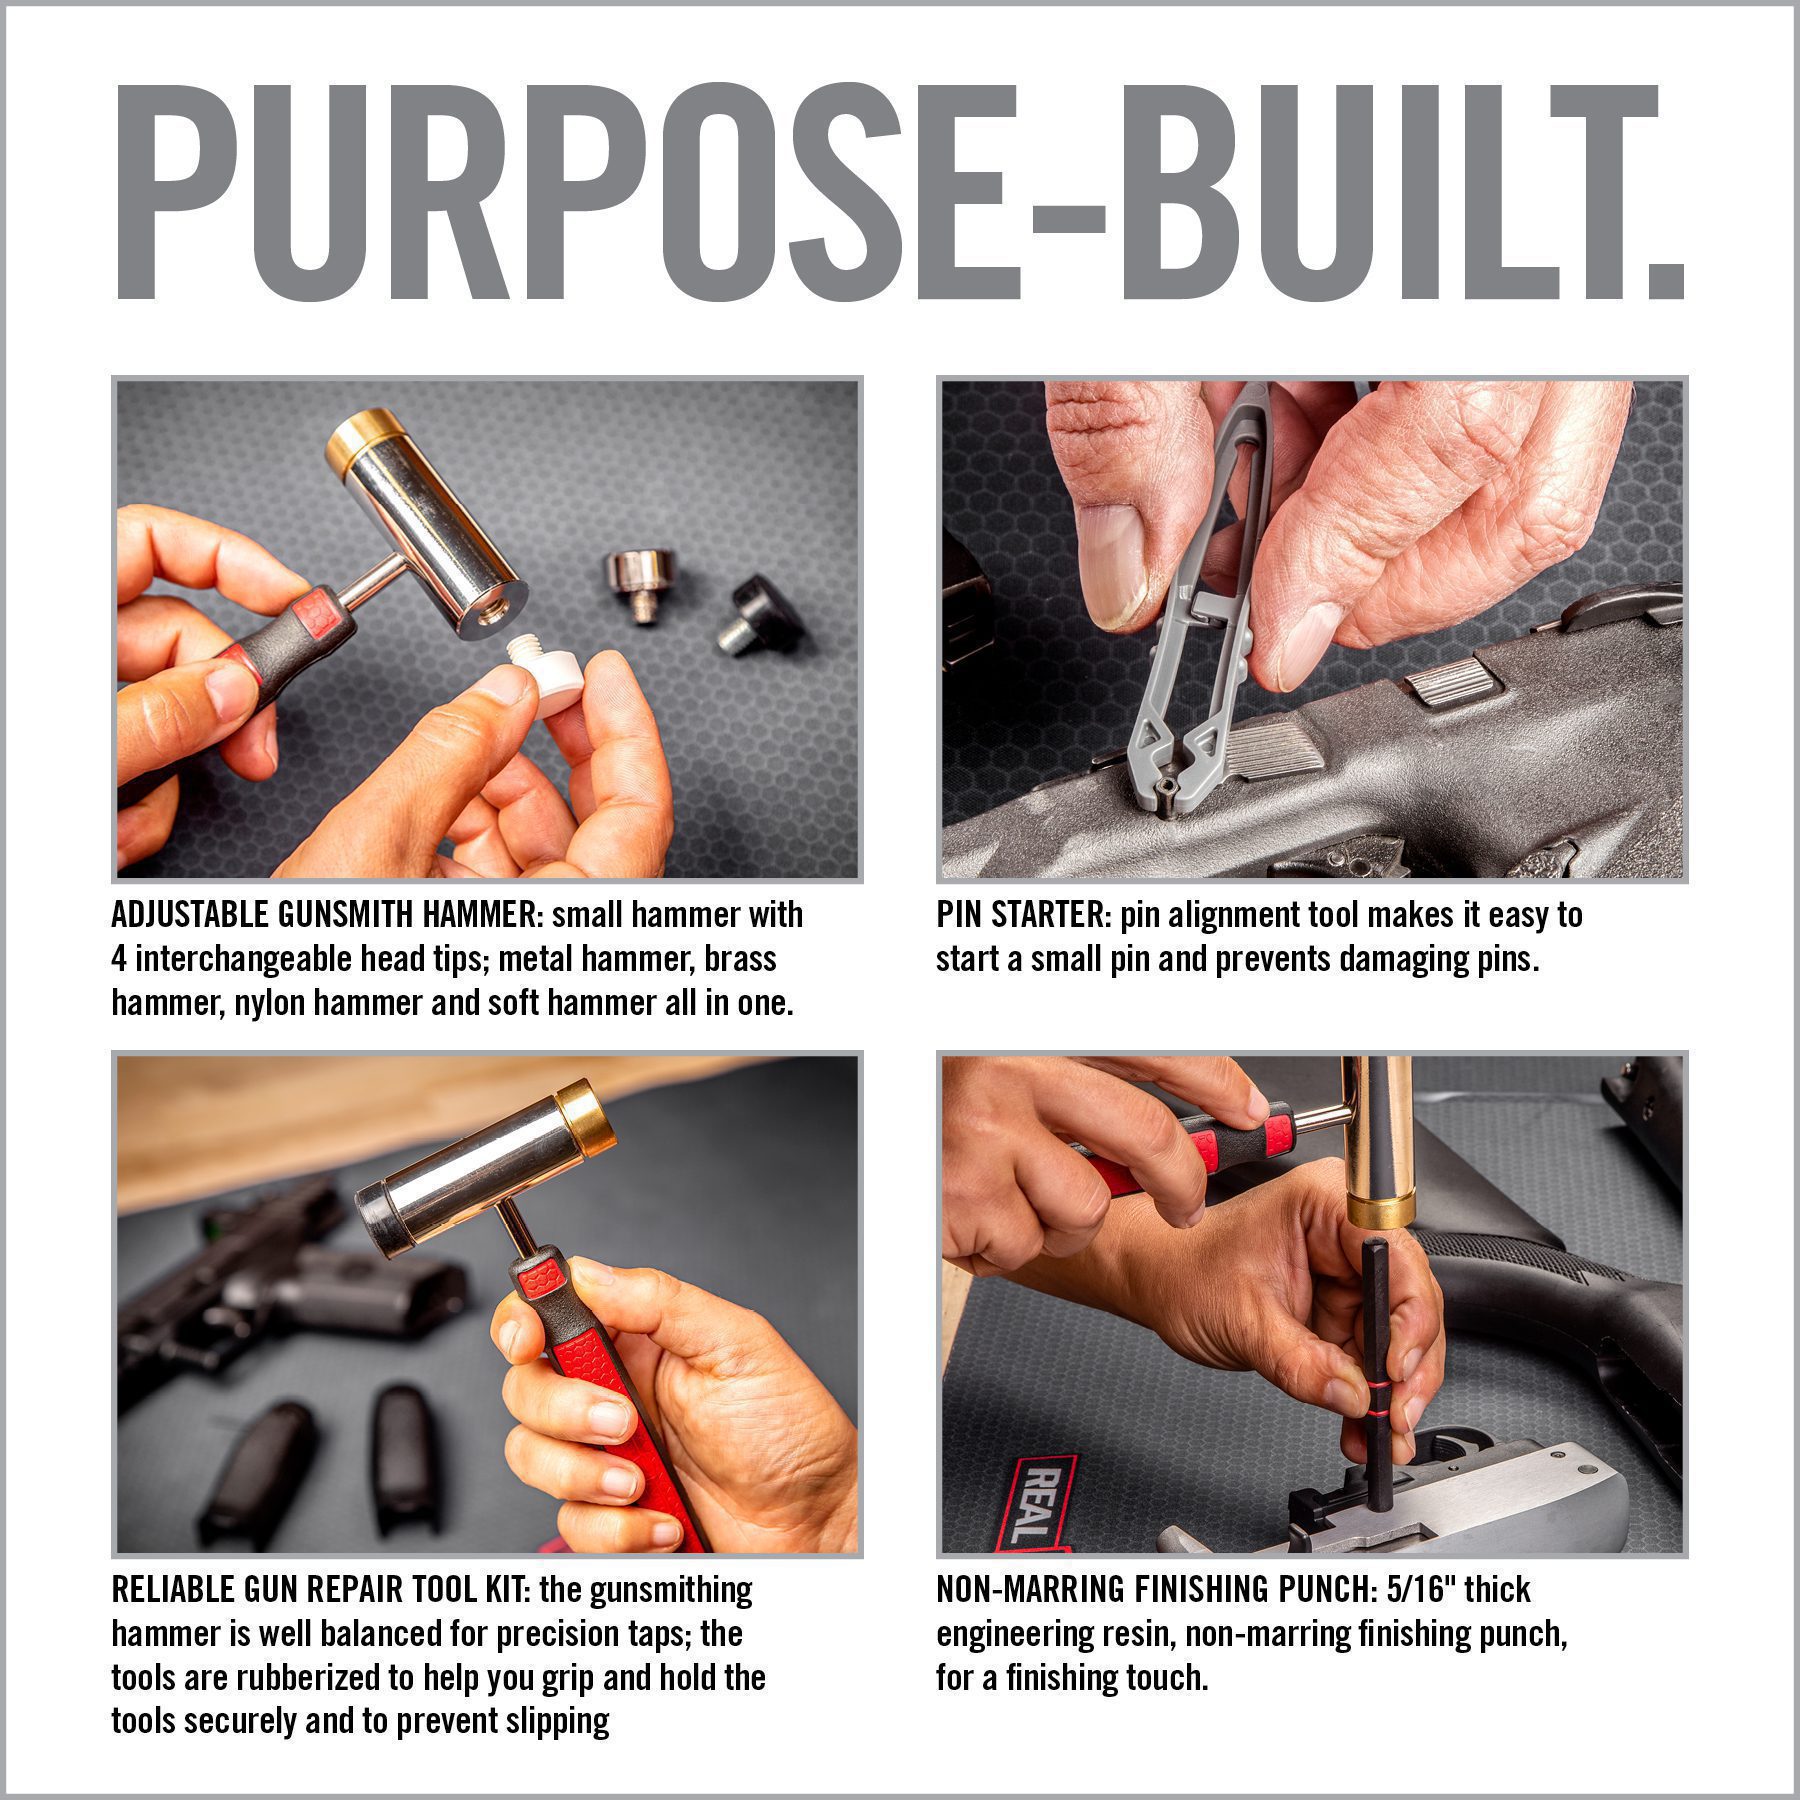 Mini Hand Drill - Complete Assembly